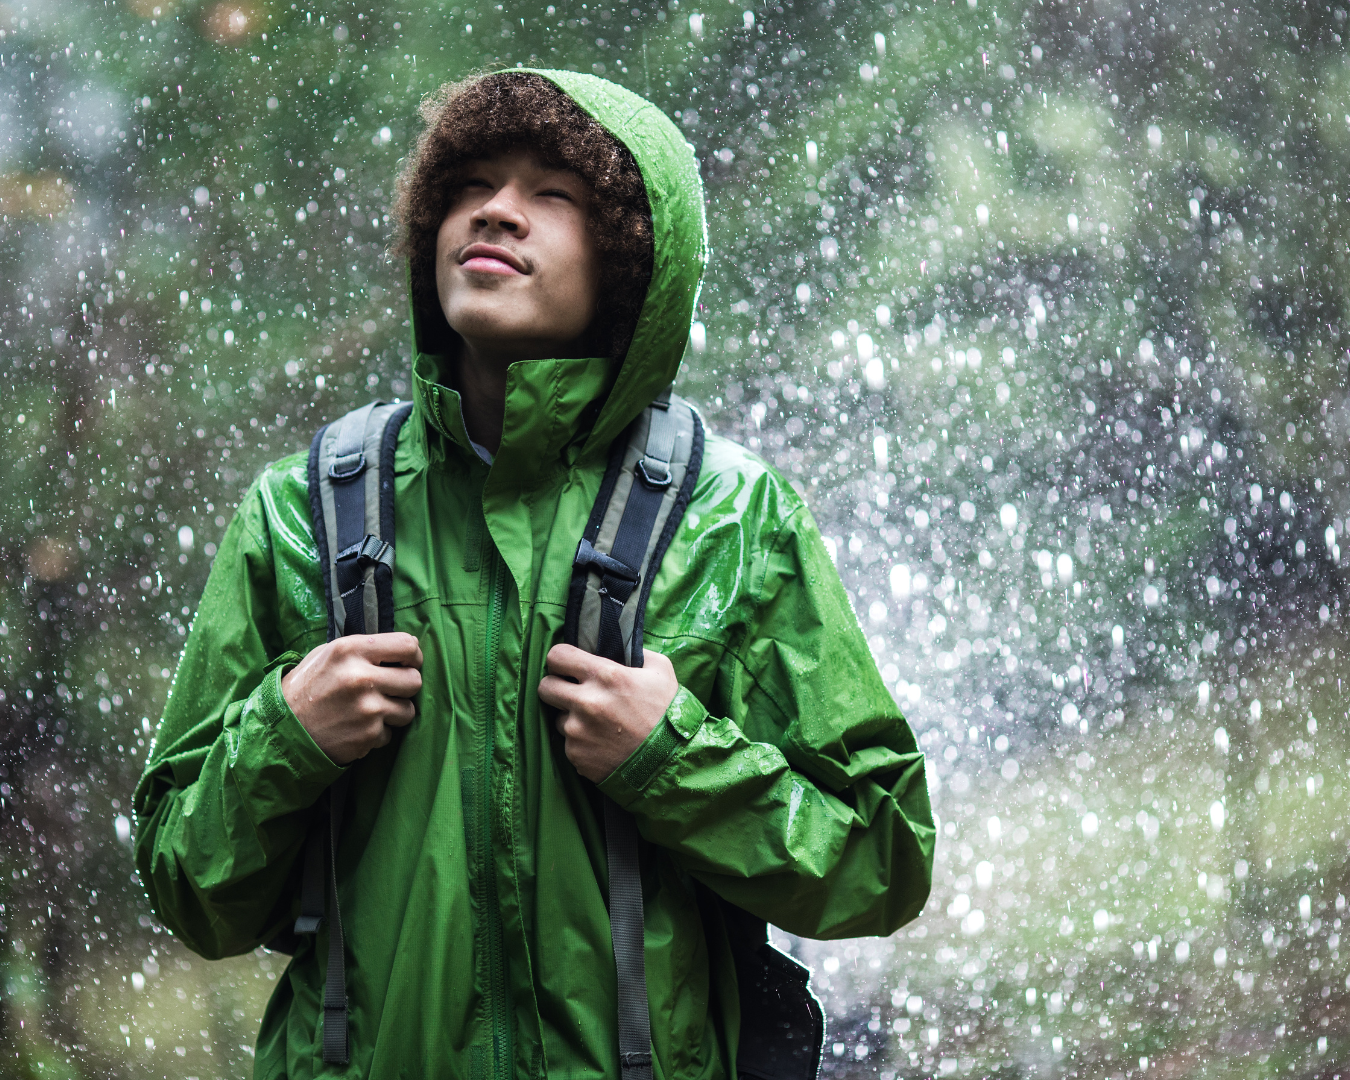 Top 5 Tactical Gear Must-Haves for Rainy Season Adventures